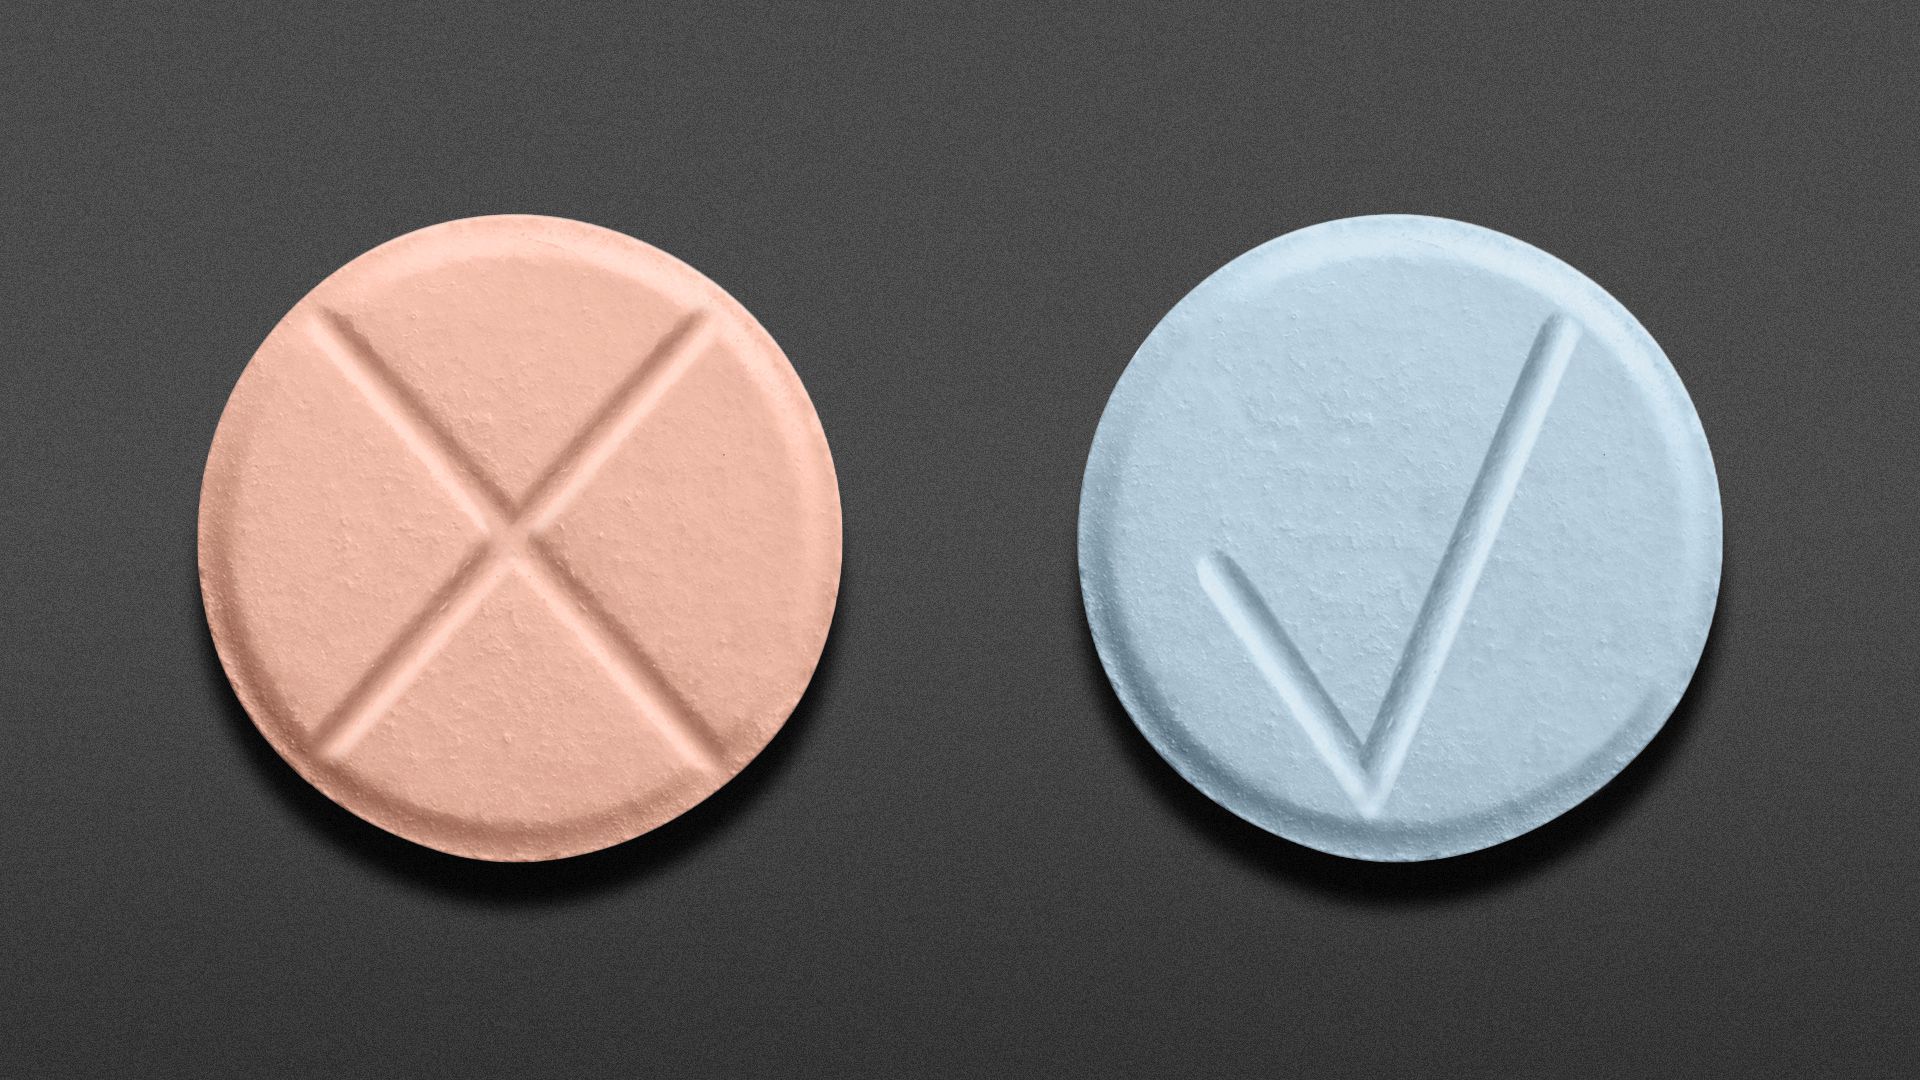 Illustration of two pills side-by-side, one with an etched "X" and one with an etched checkmark